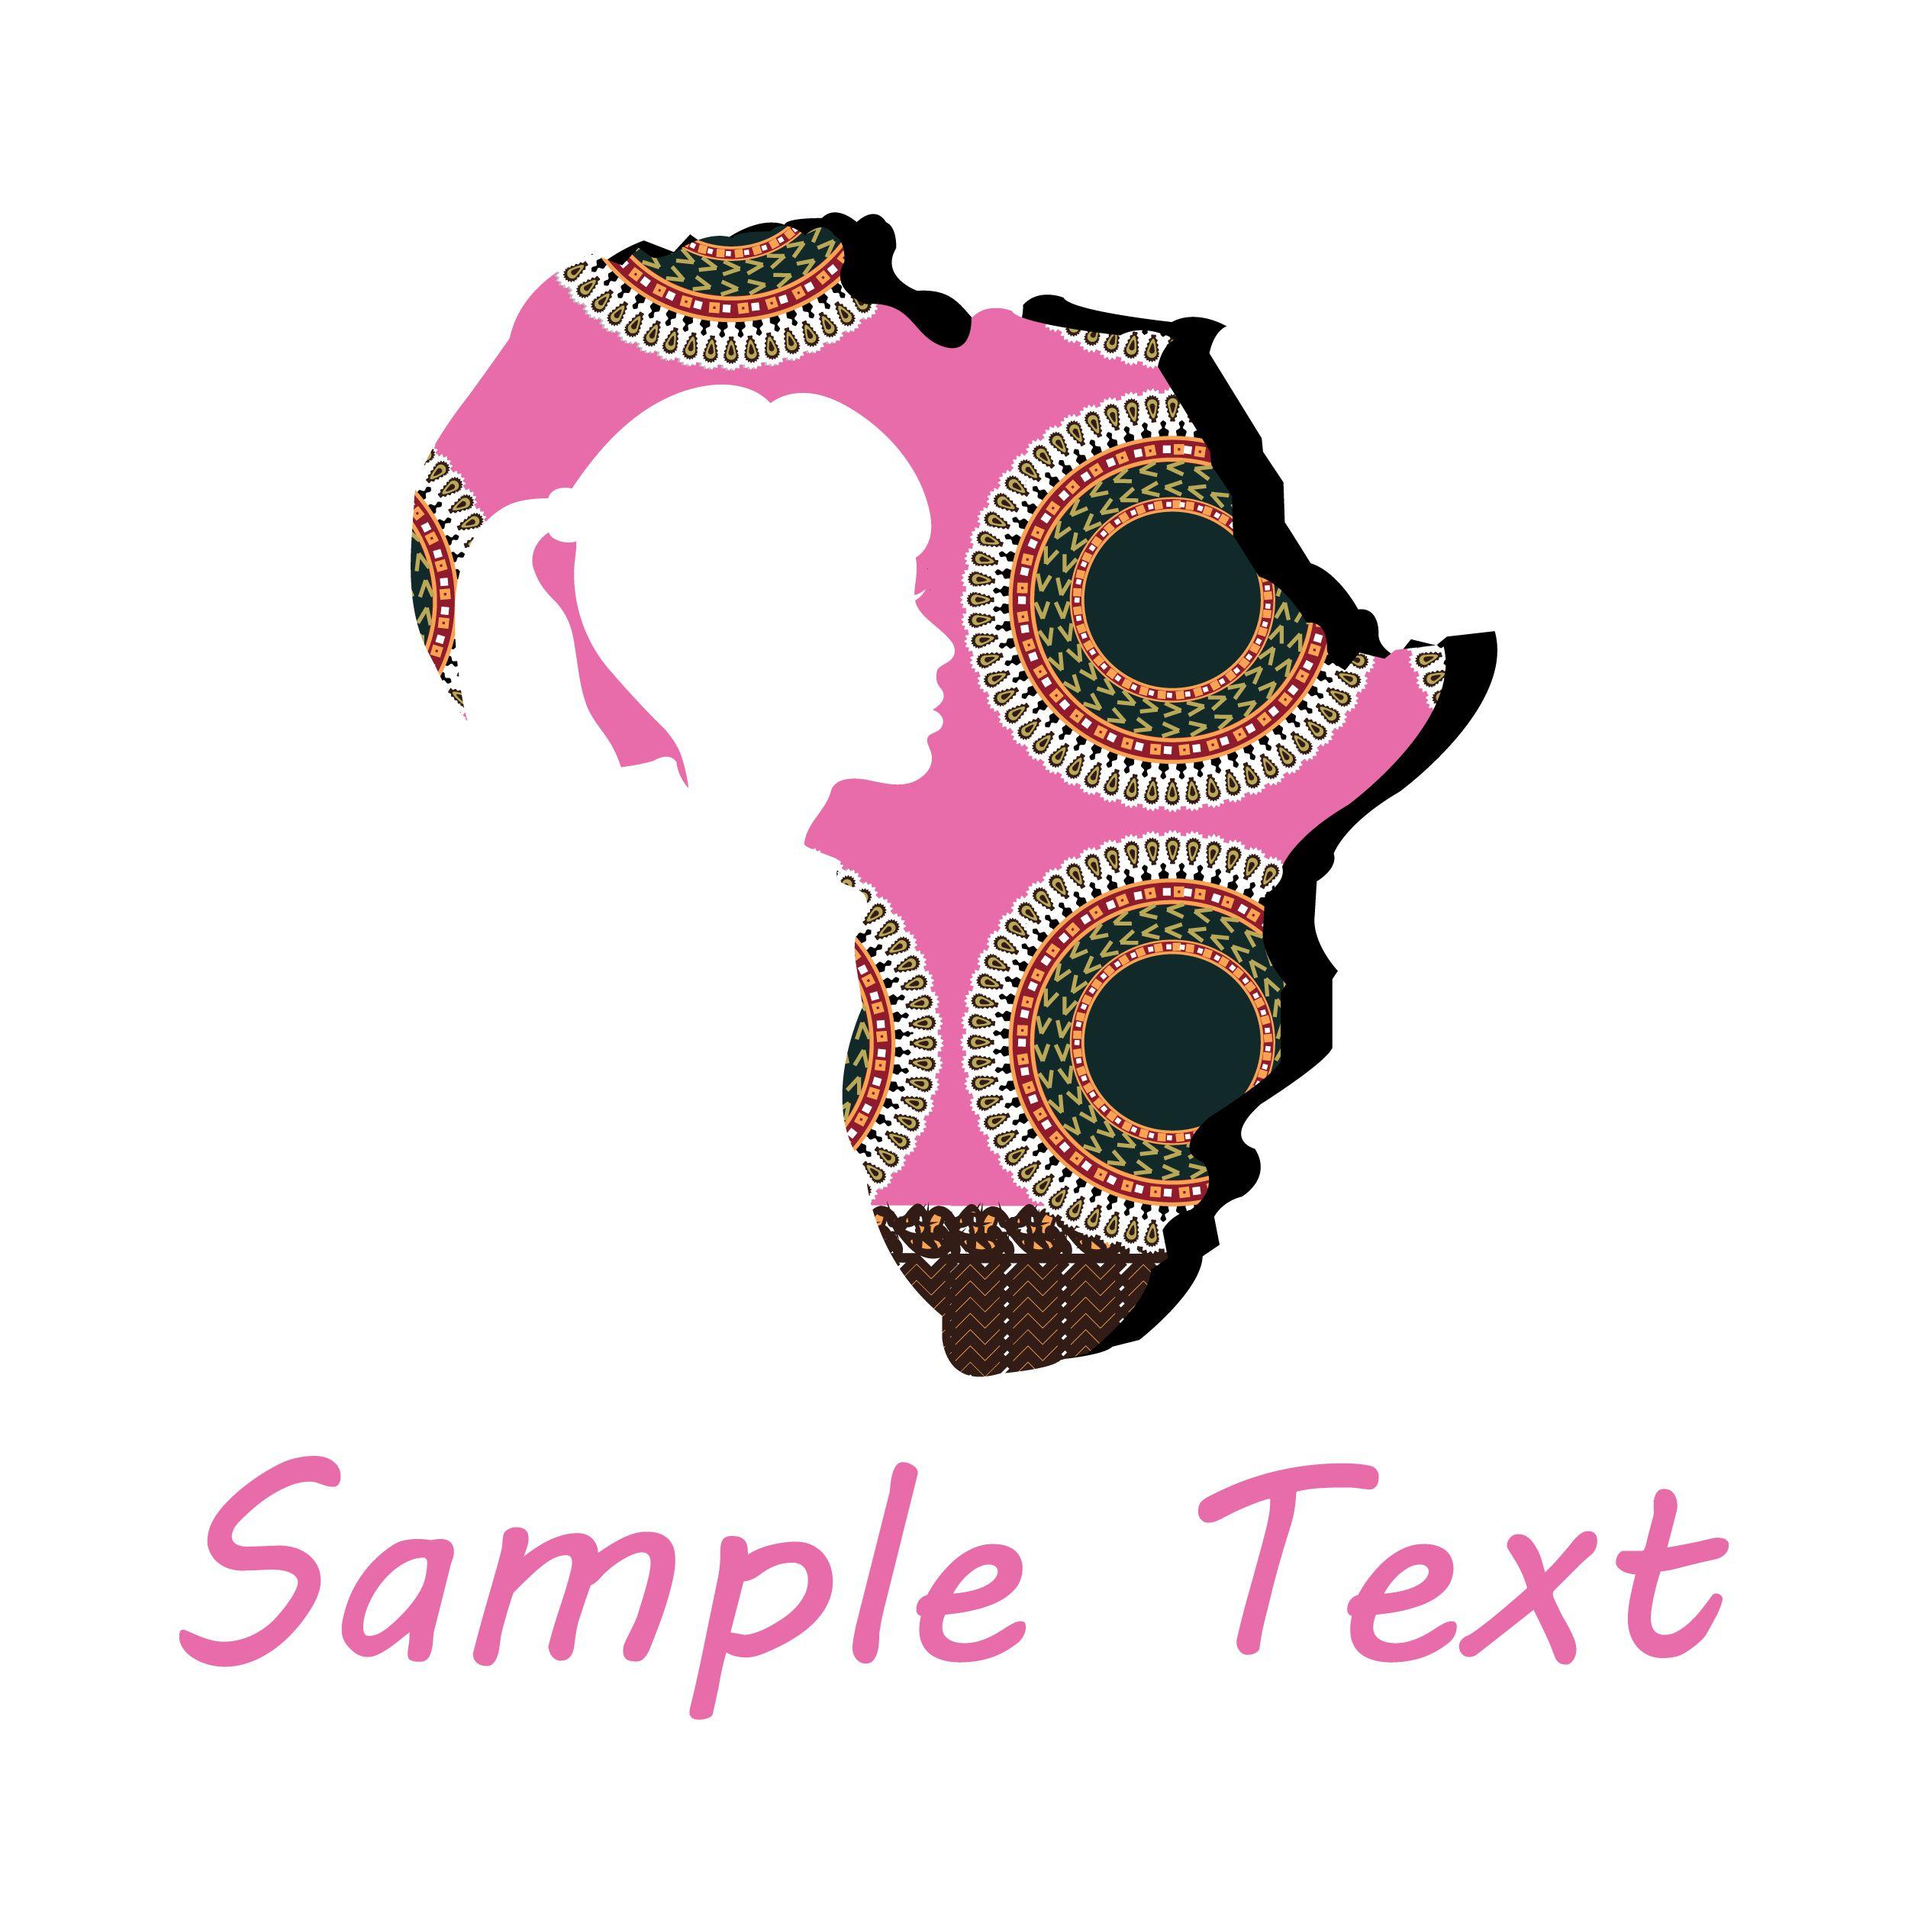 African Logo - Design African Logo for you for $10